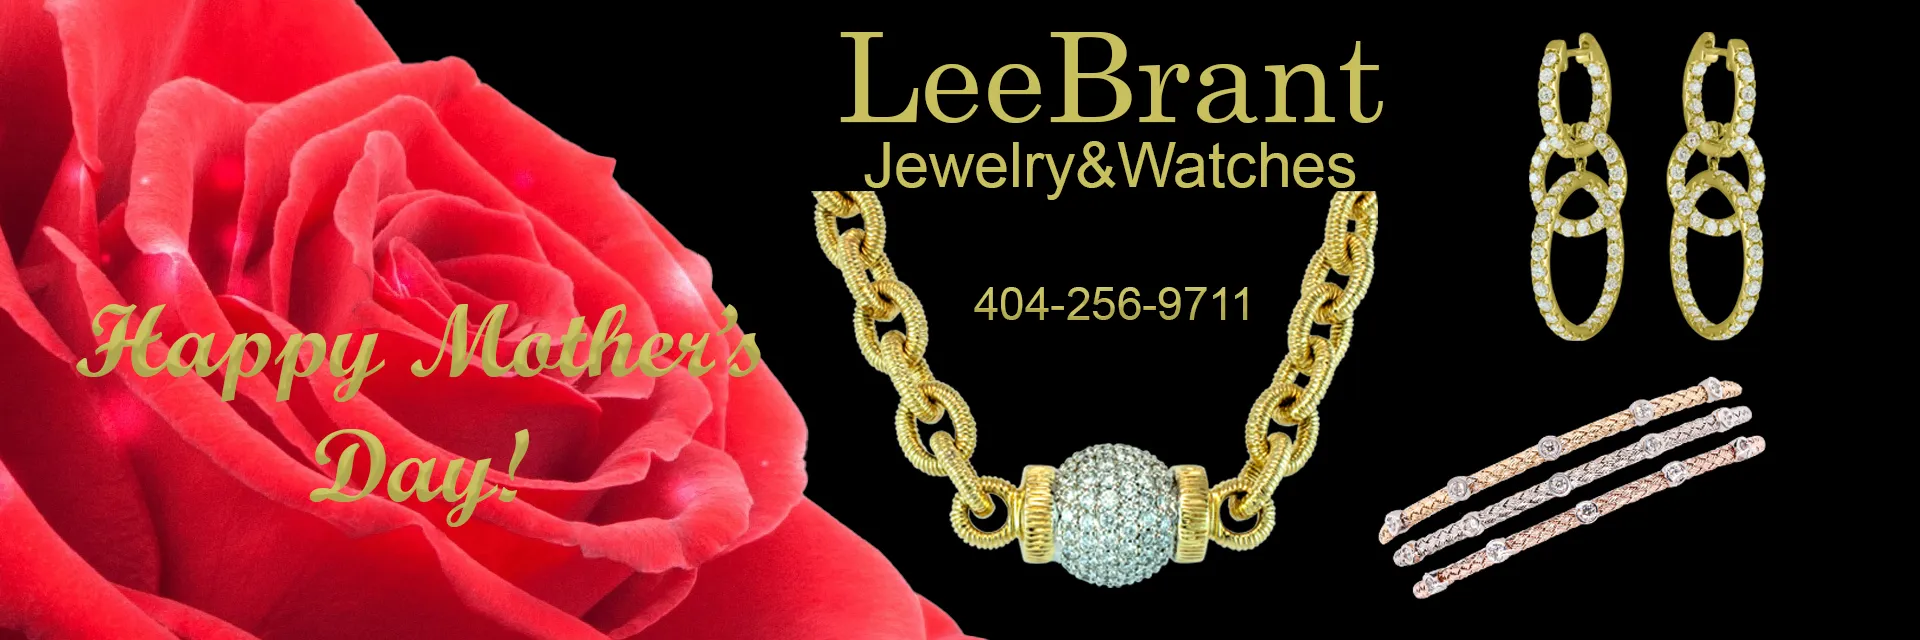 Where Luxury is Affordable.  LeeBrant Jewelry & Watch Co Sandy Springs, GA